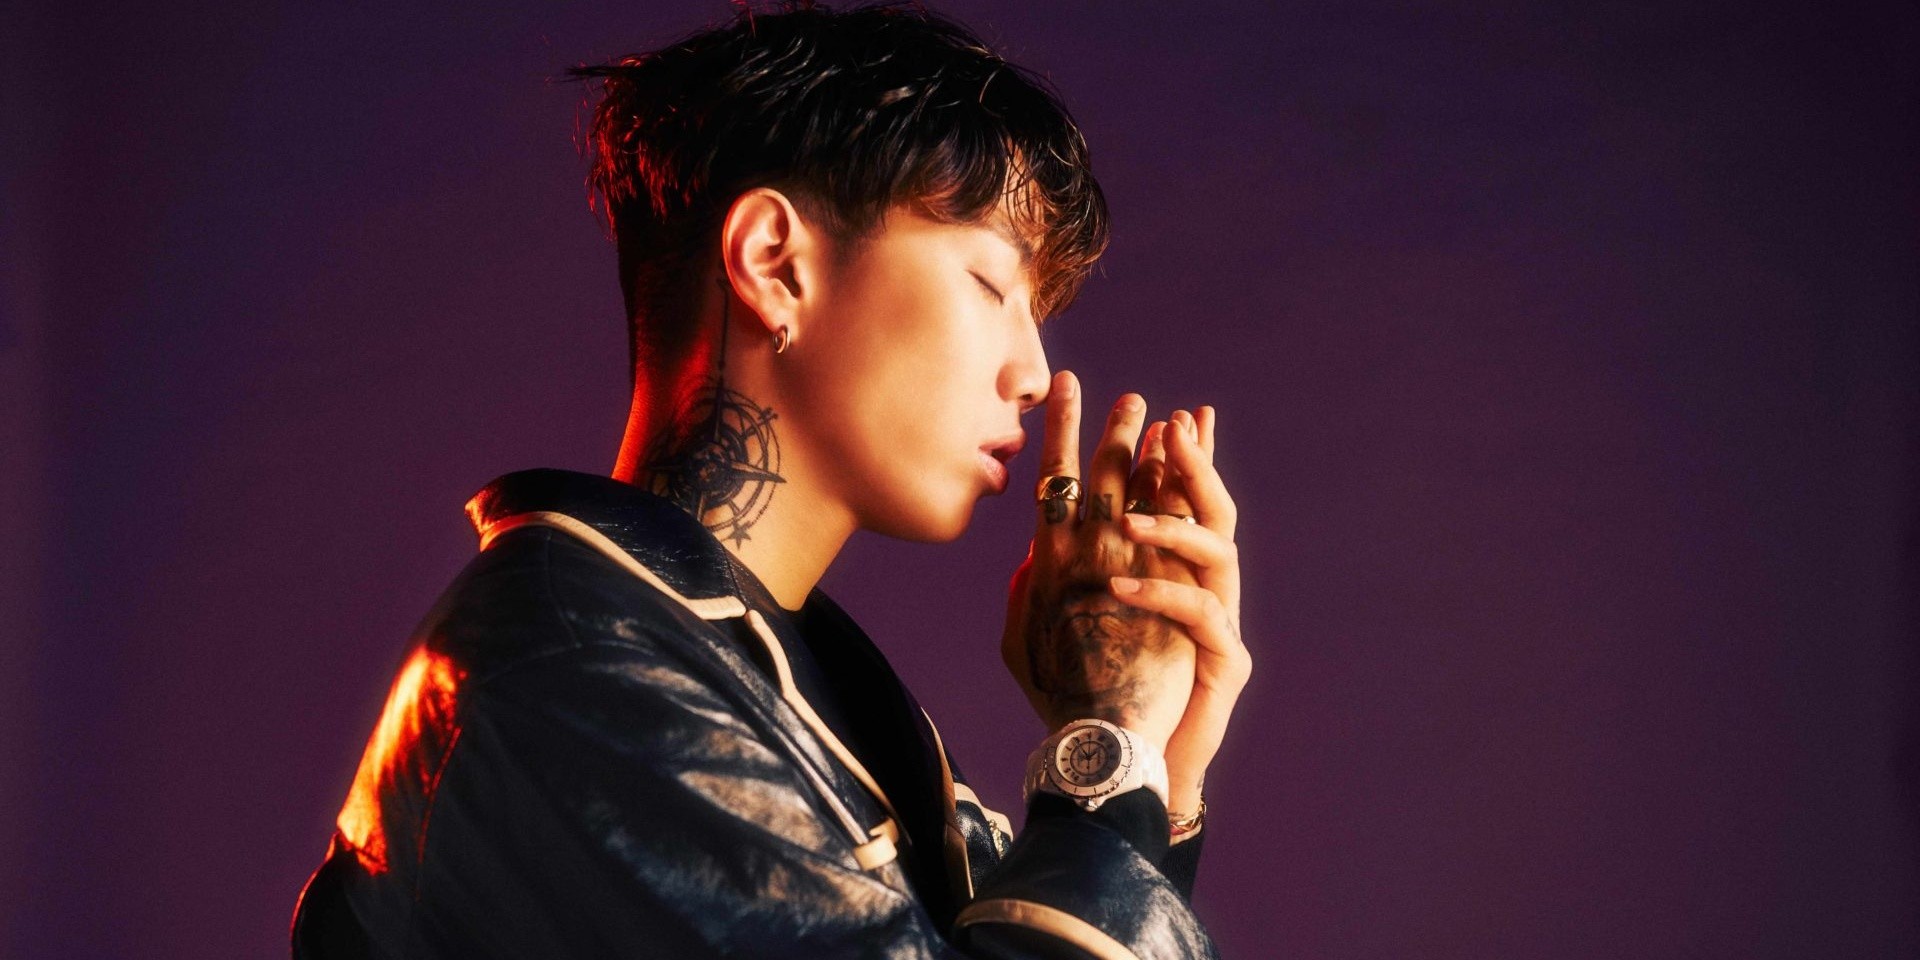 JAY PARK to perform in Singapore this September